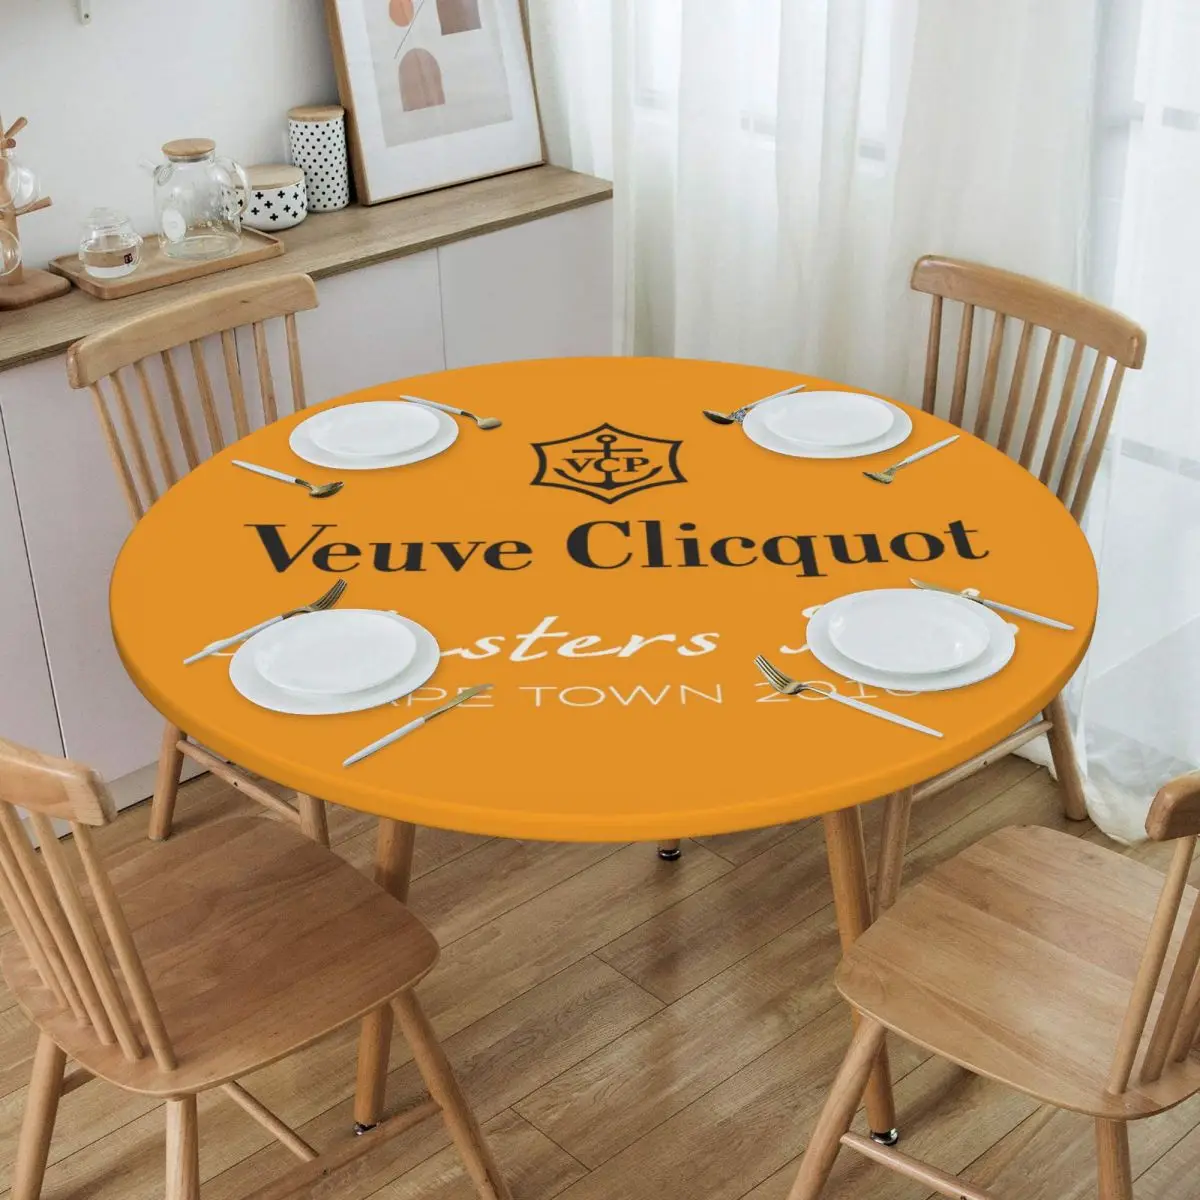 

Round Oilproof Clicquot Table Cover Elastic Fitted Veuve Beer Drinks Table Cloth Backed Edge Tablecloth for Dining